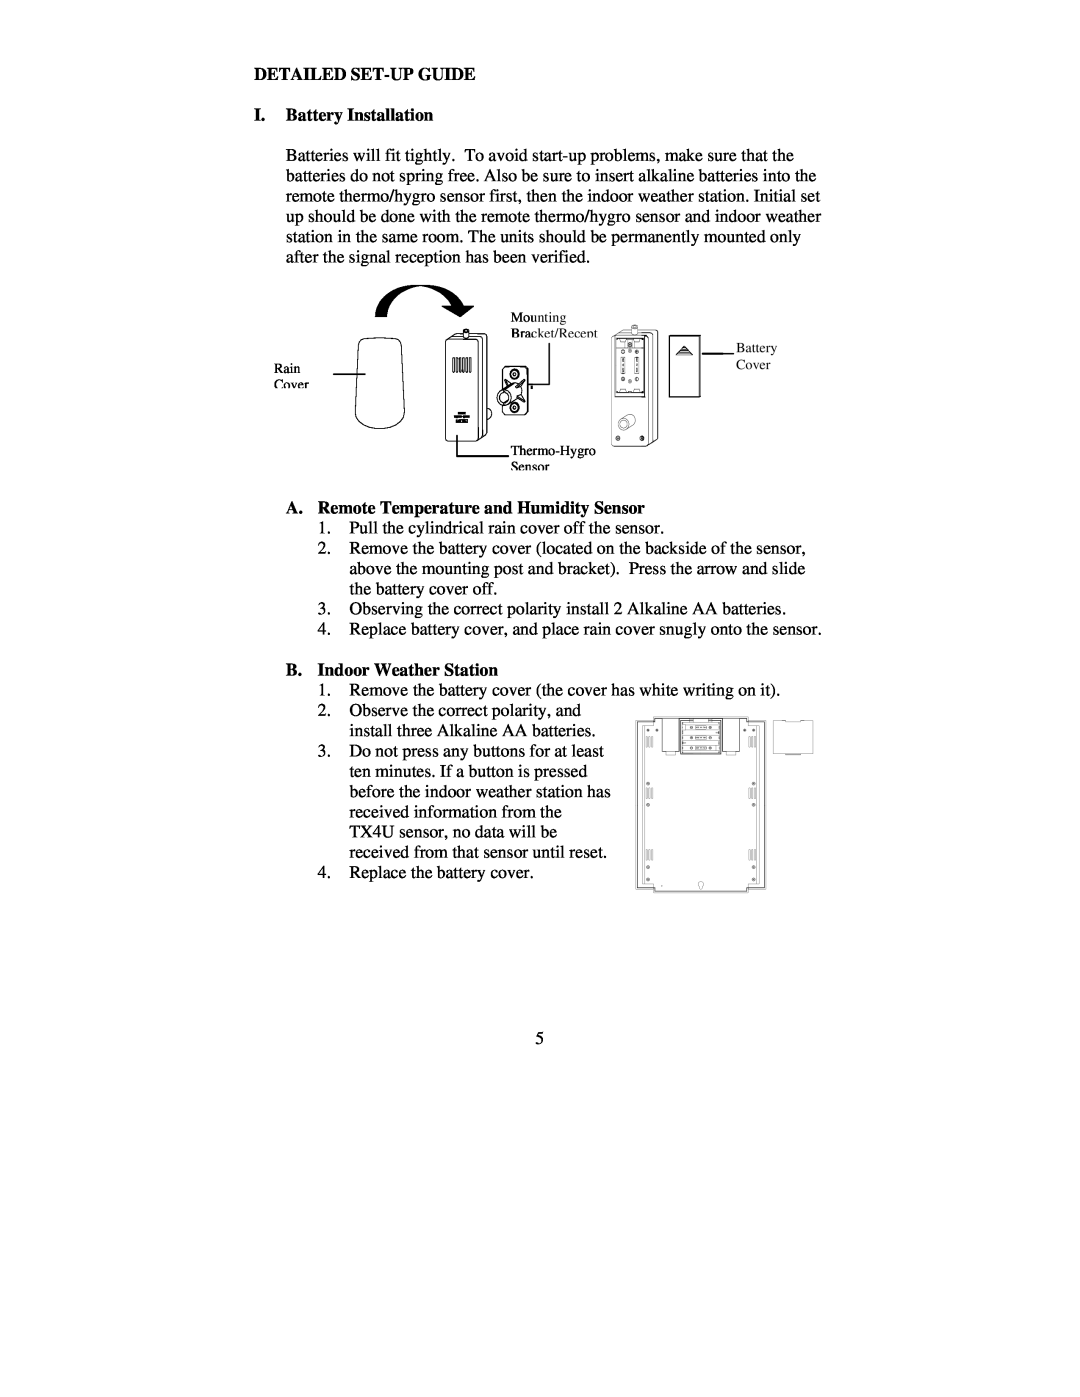 La Crosse Technology WS-8035 DETAILED SET-UP GUIDE I. Battery Installation, A. Remote Temperature and Humidity Sensor 